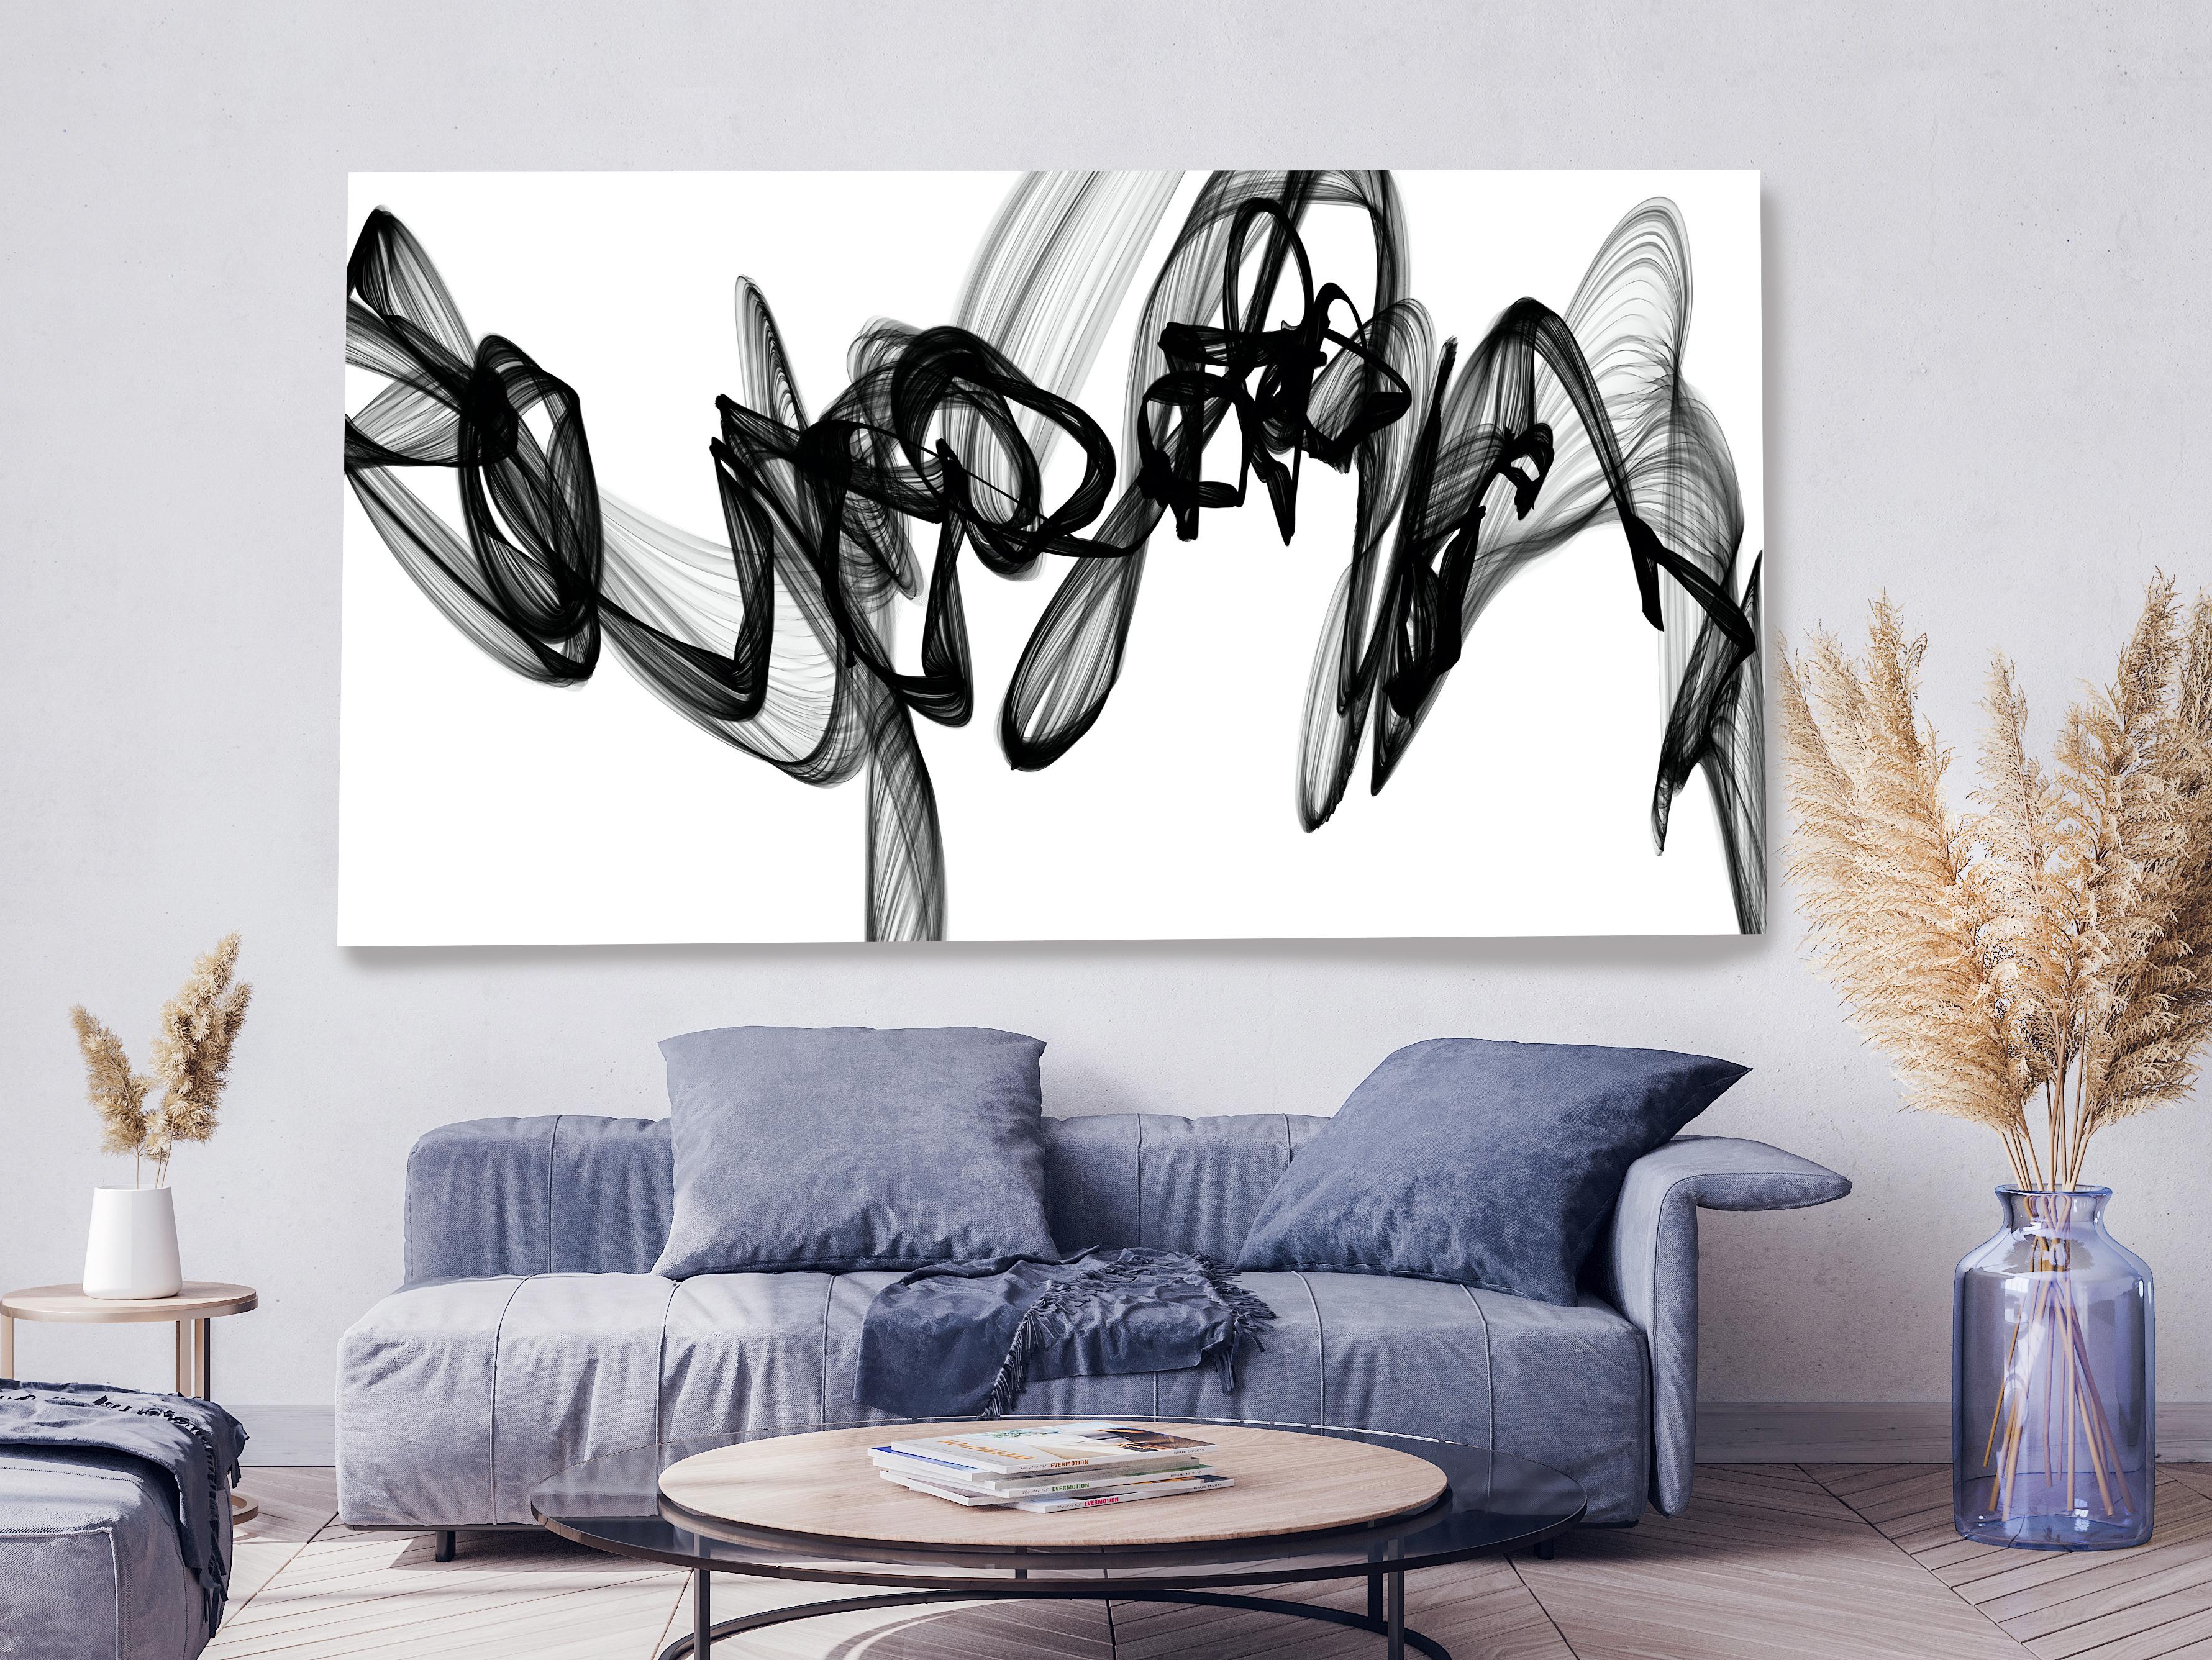 Black White Minimalist New Media vs Painting 46"H X 80"W Poetry and Music - Mixed Media Art by Irena Orlov